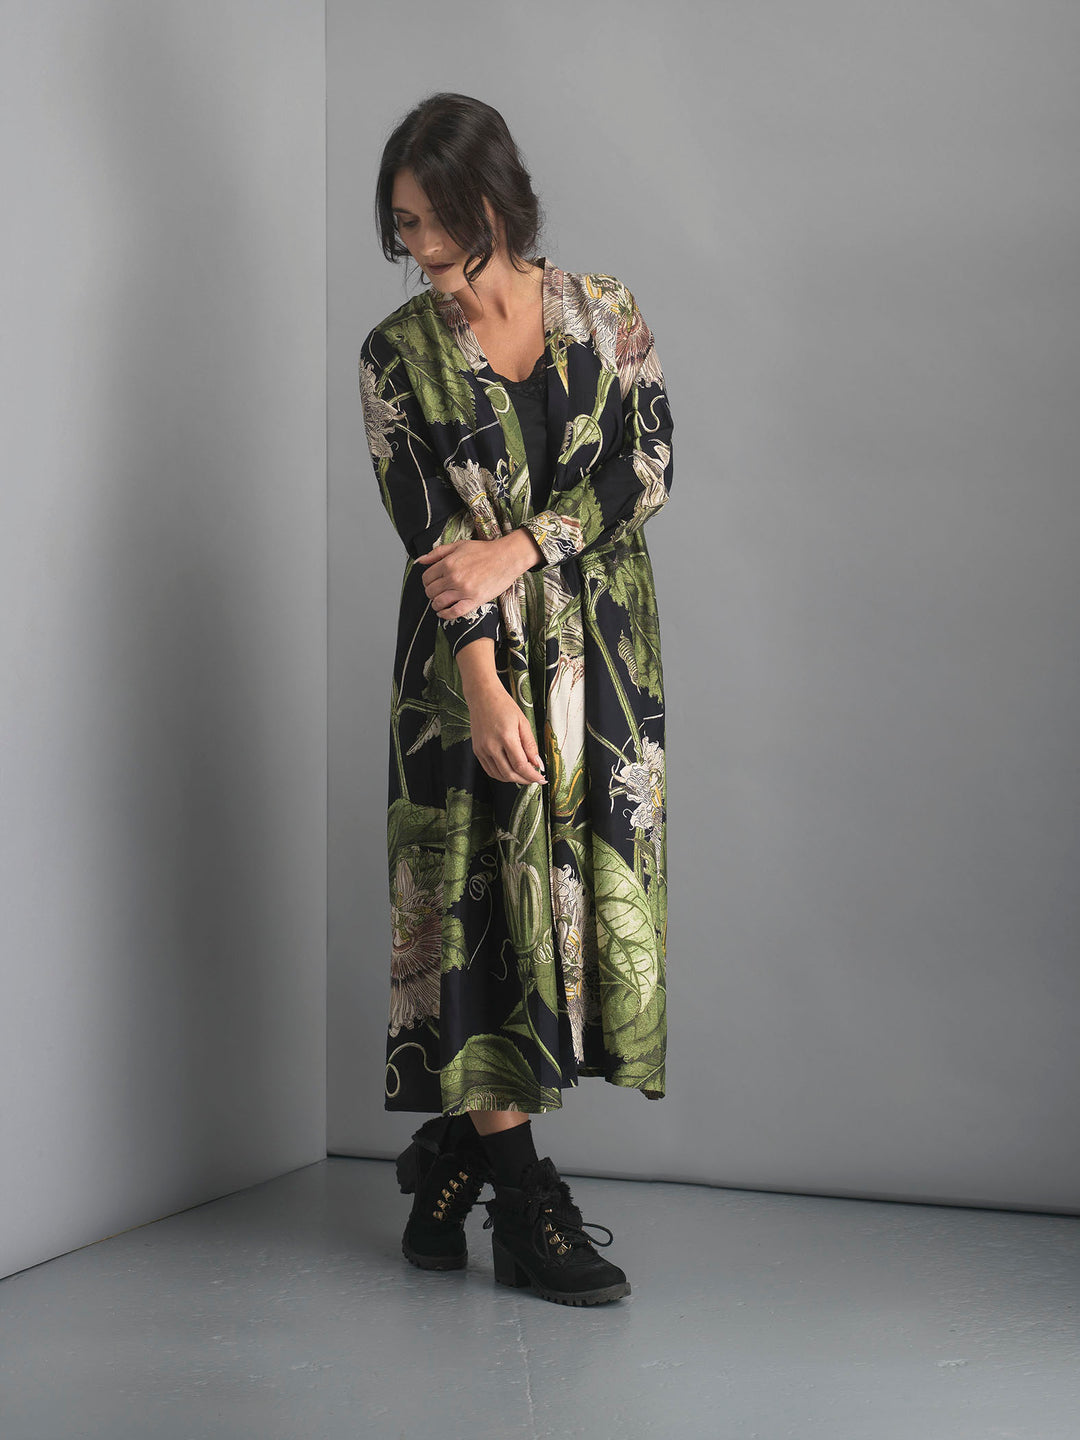 Passion Flower or 'Passiflora' print duster coat in black, as part of the The One Hundred Stars collaboration with KEW Royal Botanic Gardens. 